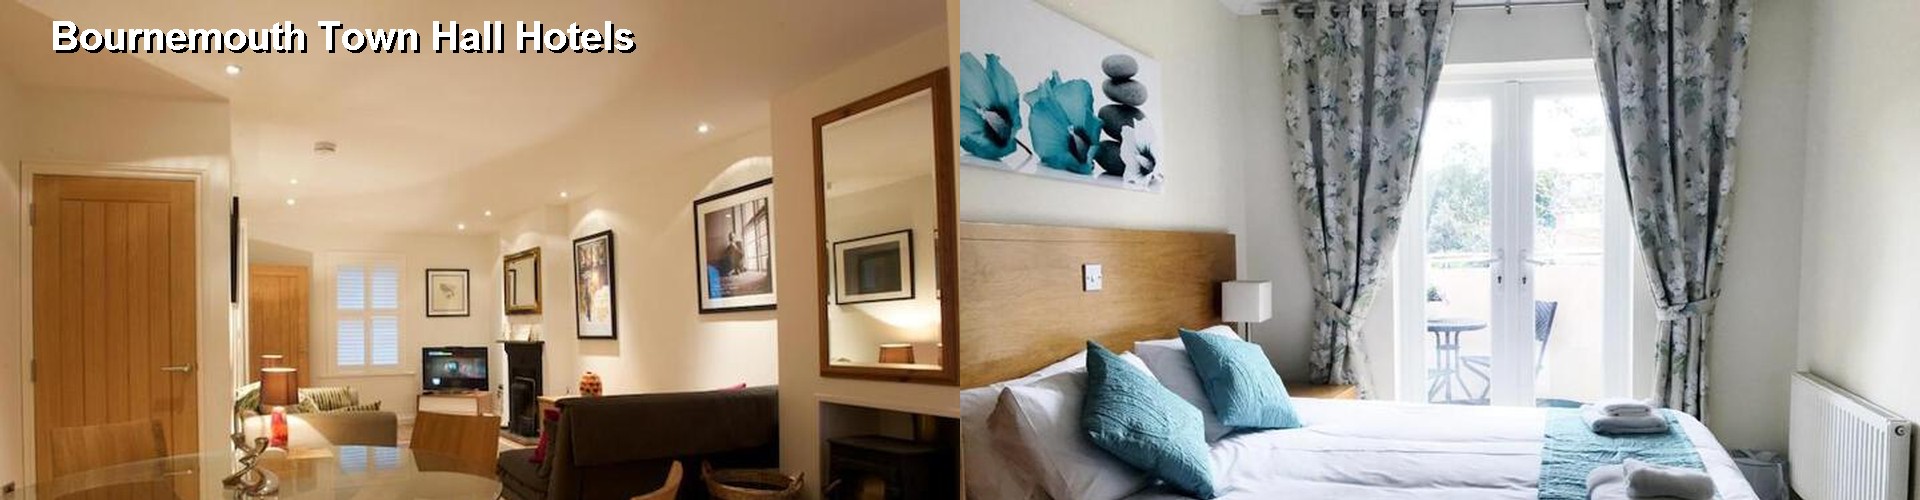 4 Best Hotels near Bournemouth Town Hall